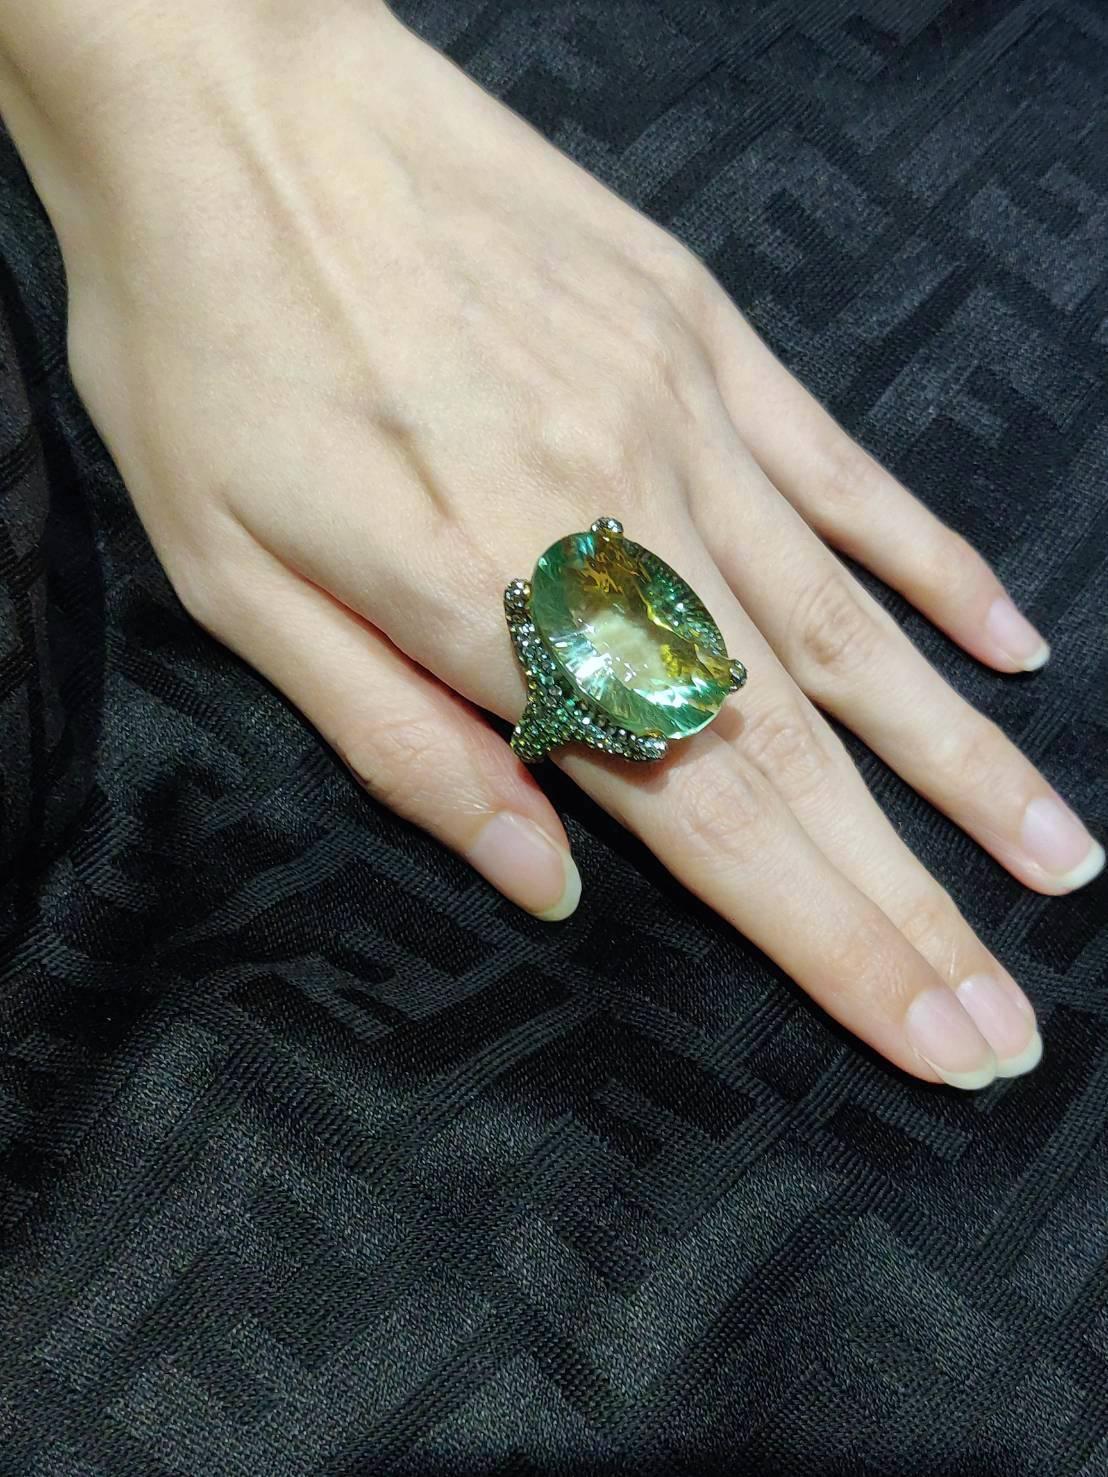 55.94 Carat Fluorite Claw Ring embellished with Aquamarine and Tsavorite

We offer complimentary resizing service. Simply let us know upon checkout.

Size: US 6.5 / 52.5

Fluorite: 55.94 ct
Aquamarine and Tsavorite: 5.91 ct
Gold: 18K Yellow Gold,